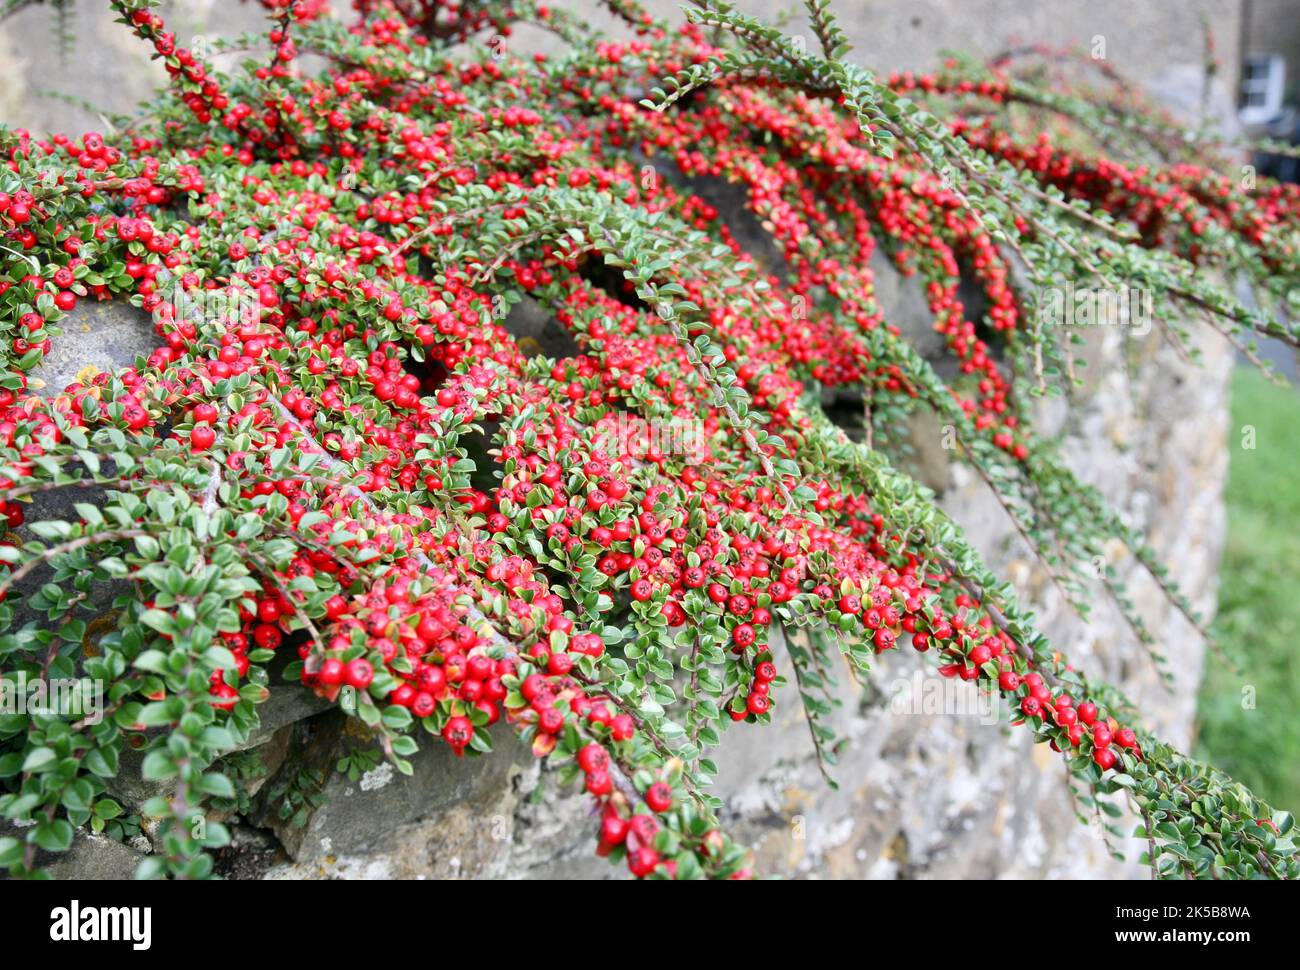 A Cotoneaster Horizontalis deciduous shrub, laden with shiny red berries Stock Photo